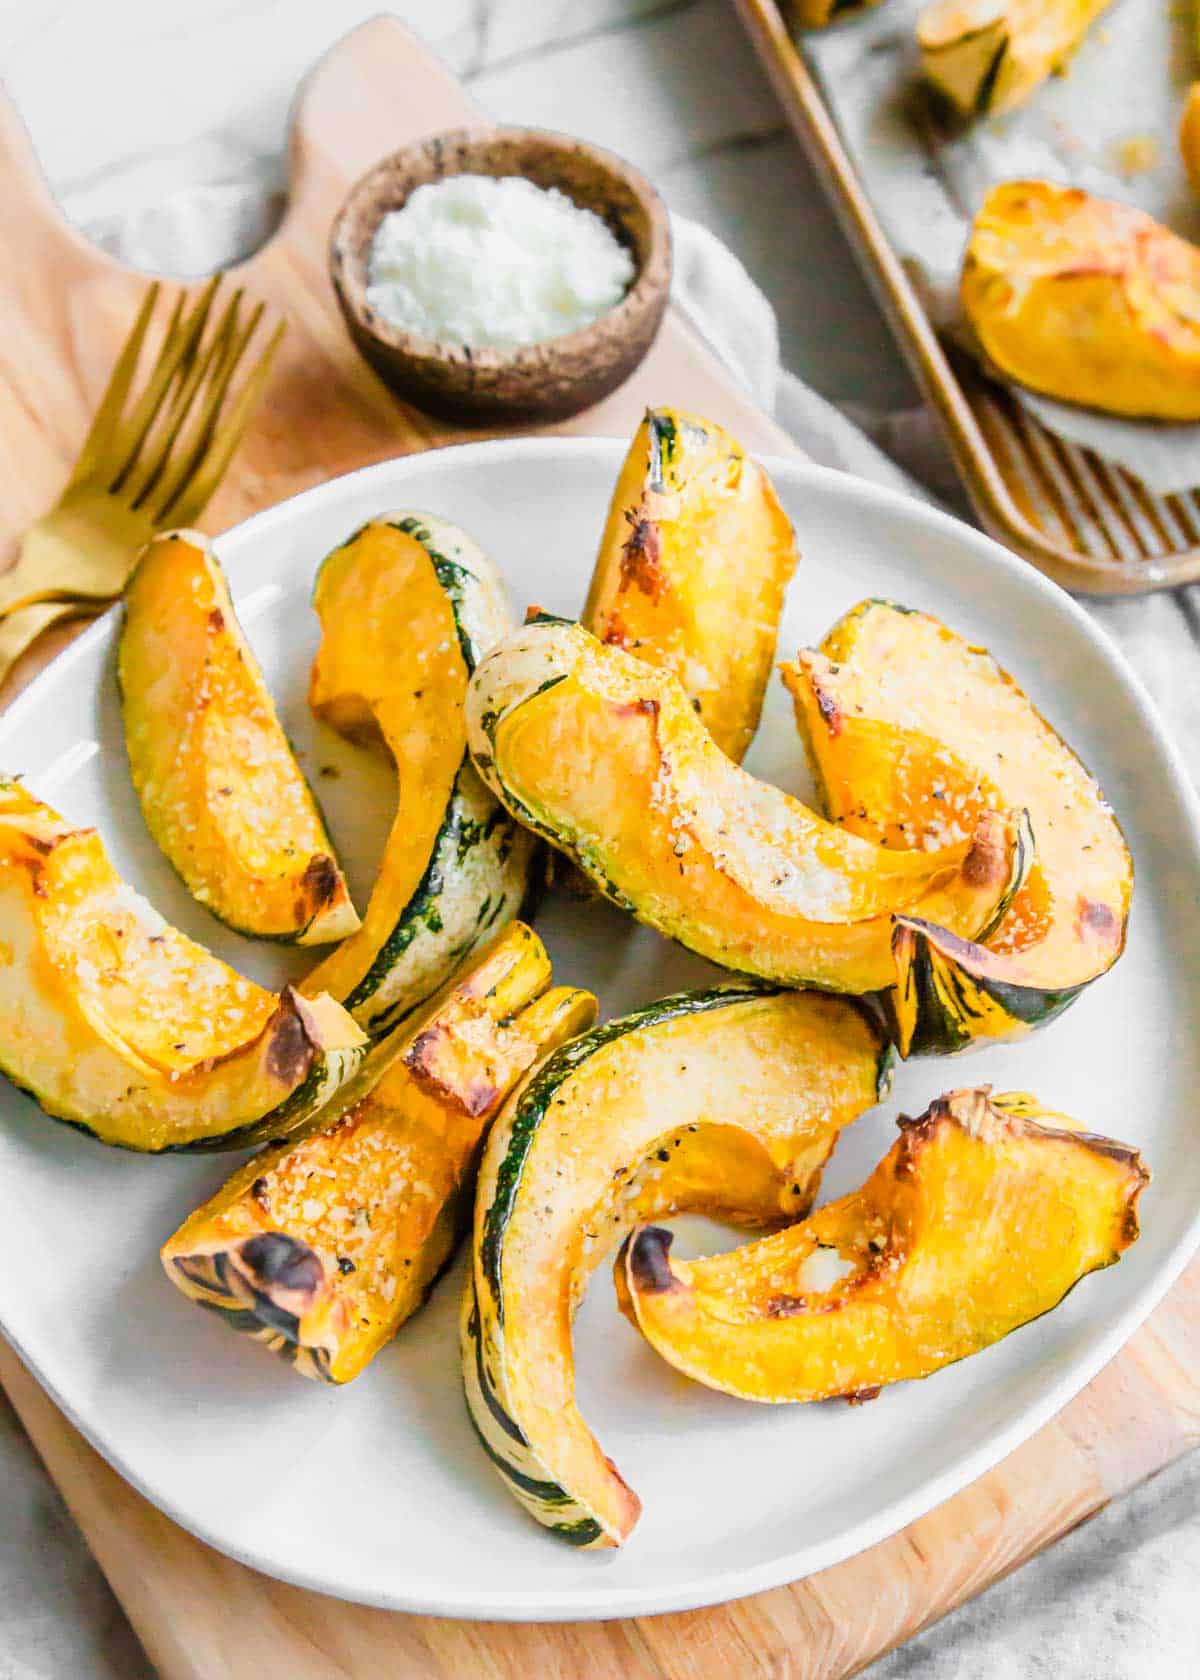 Garlic parmesan roasted carnival squash wedges on a serving plate.